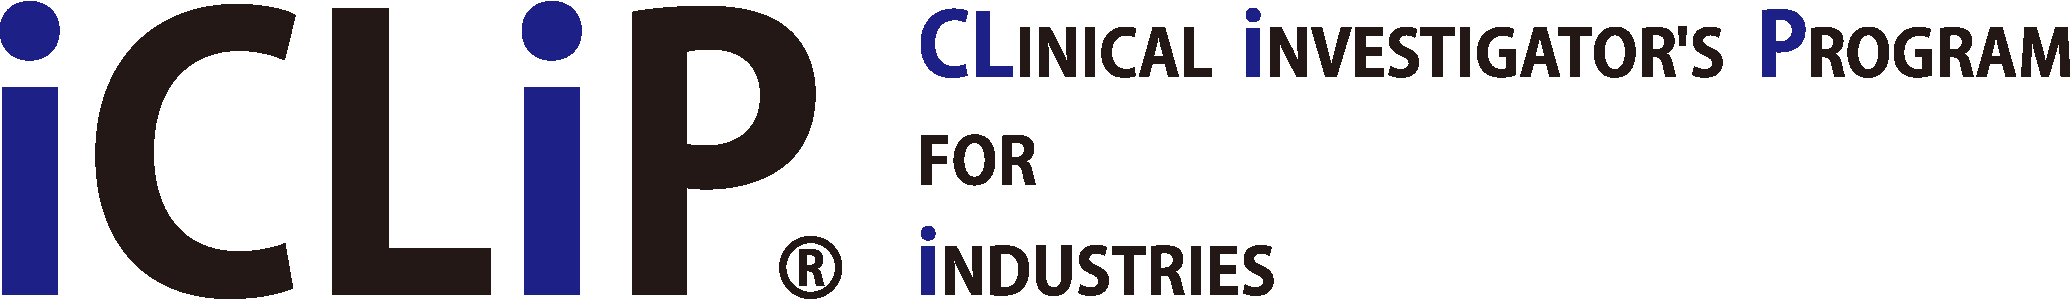 iCLiP® [Clinical investigator's Program for industries]